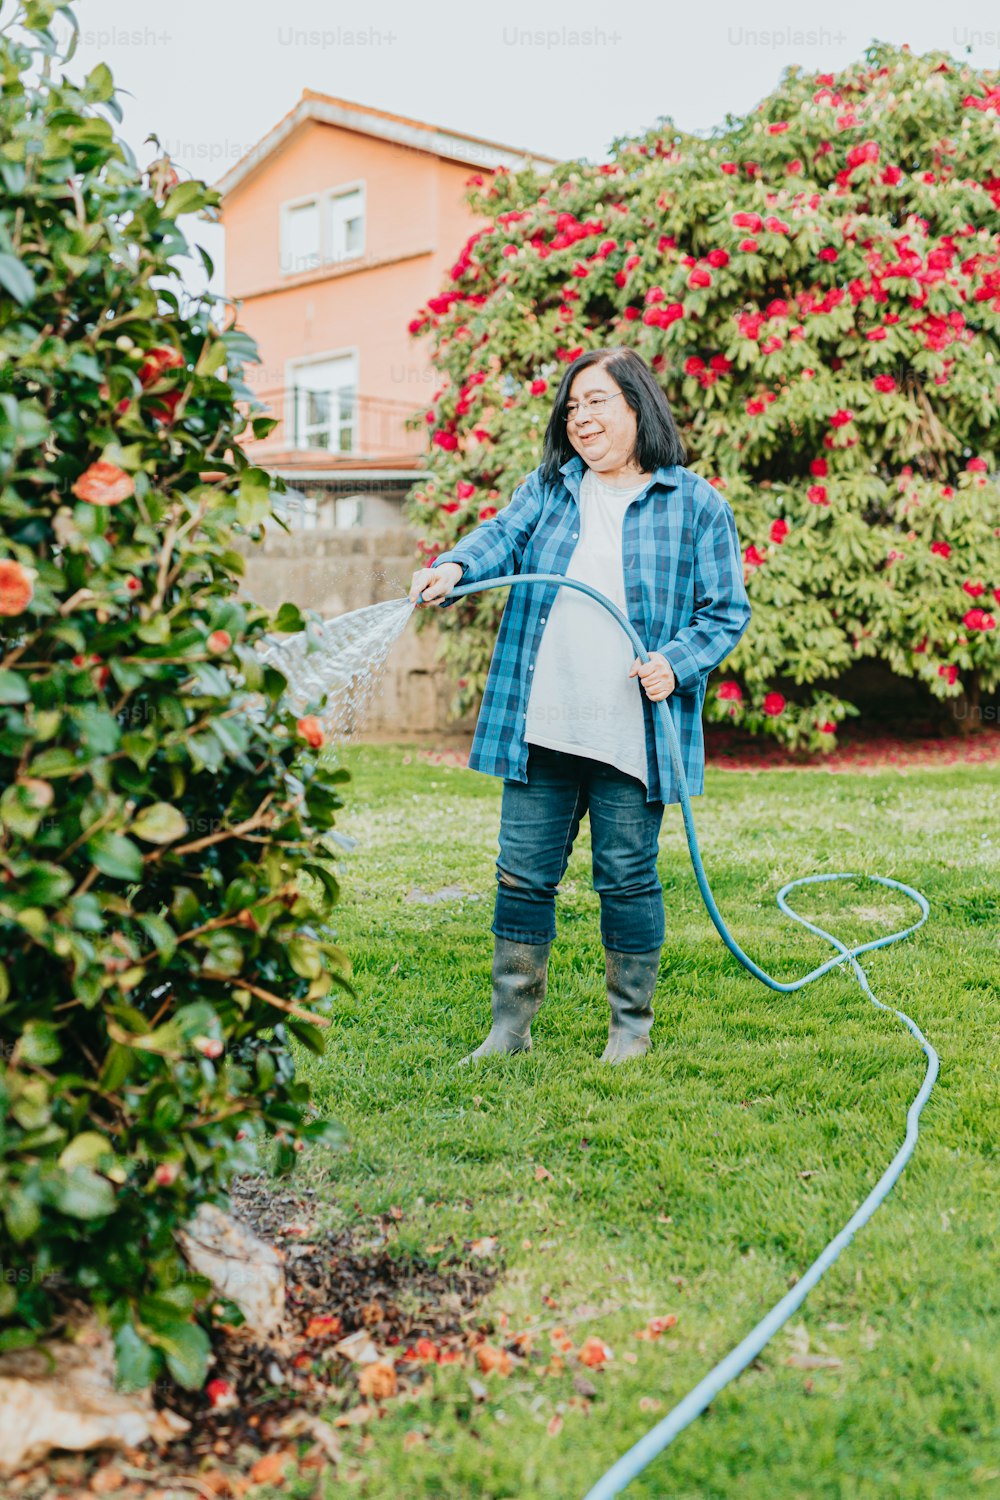 a woman watering her garden with a hose